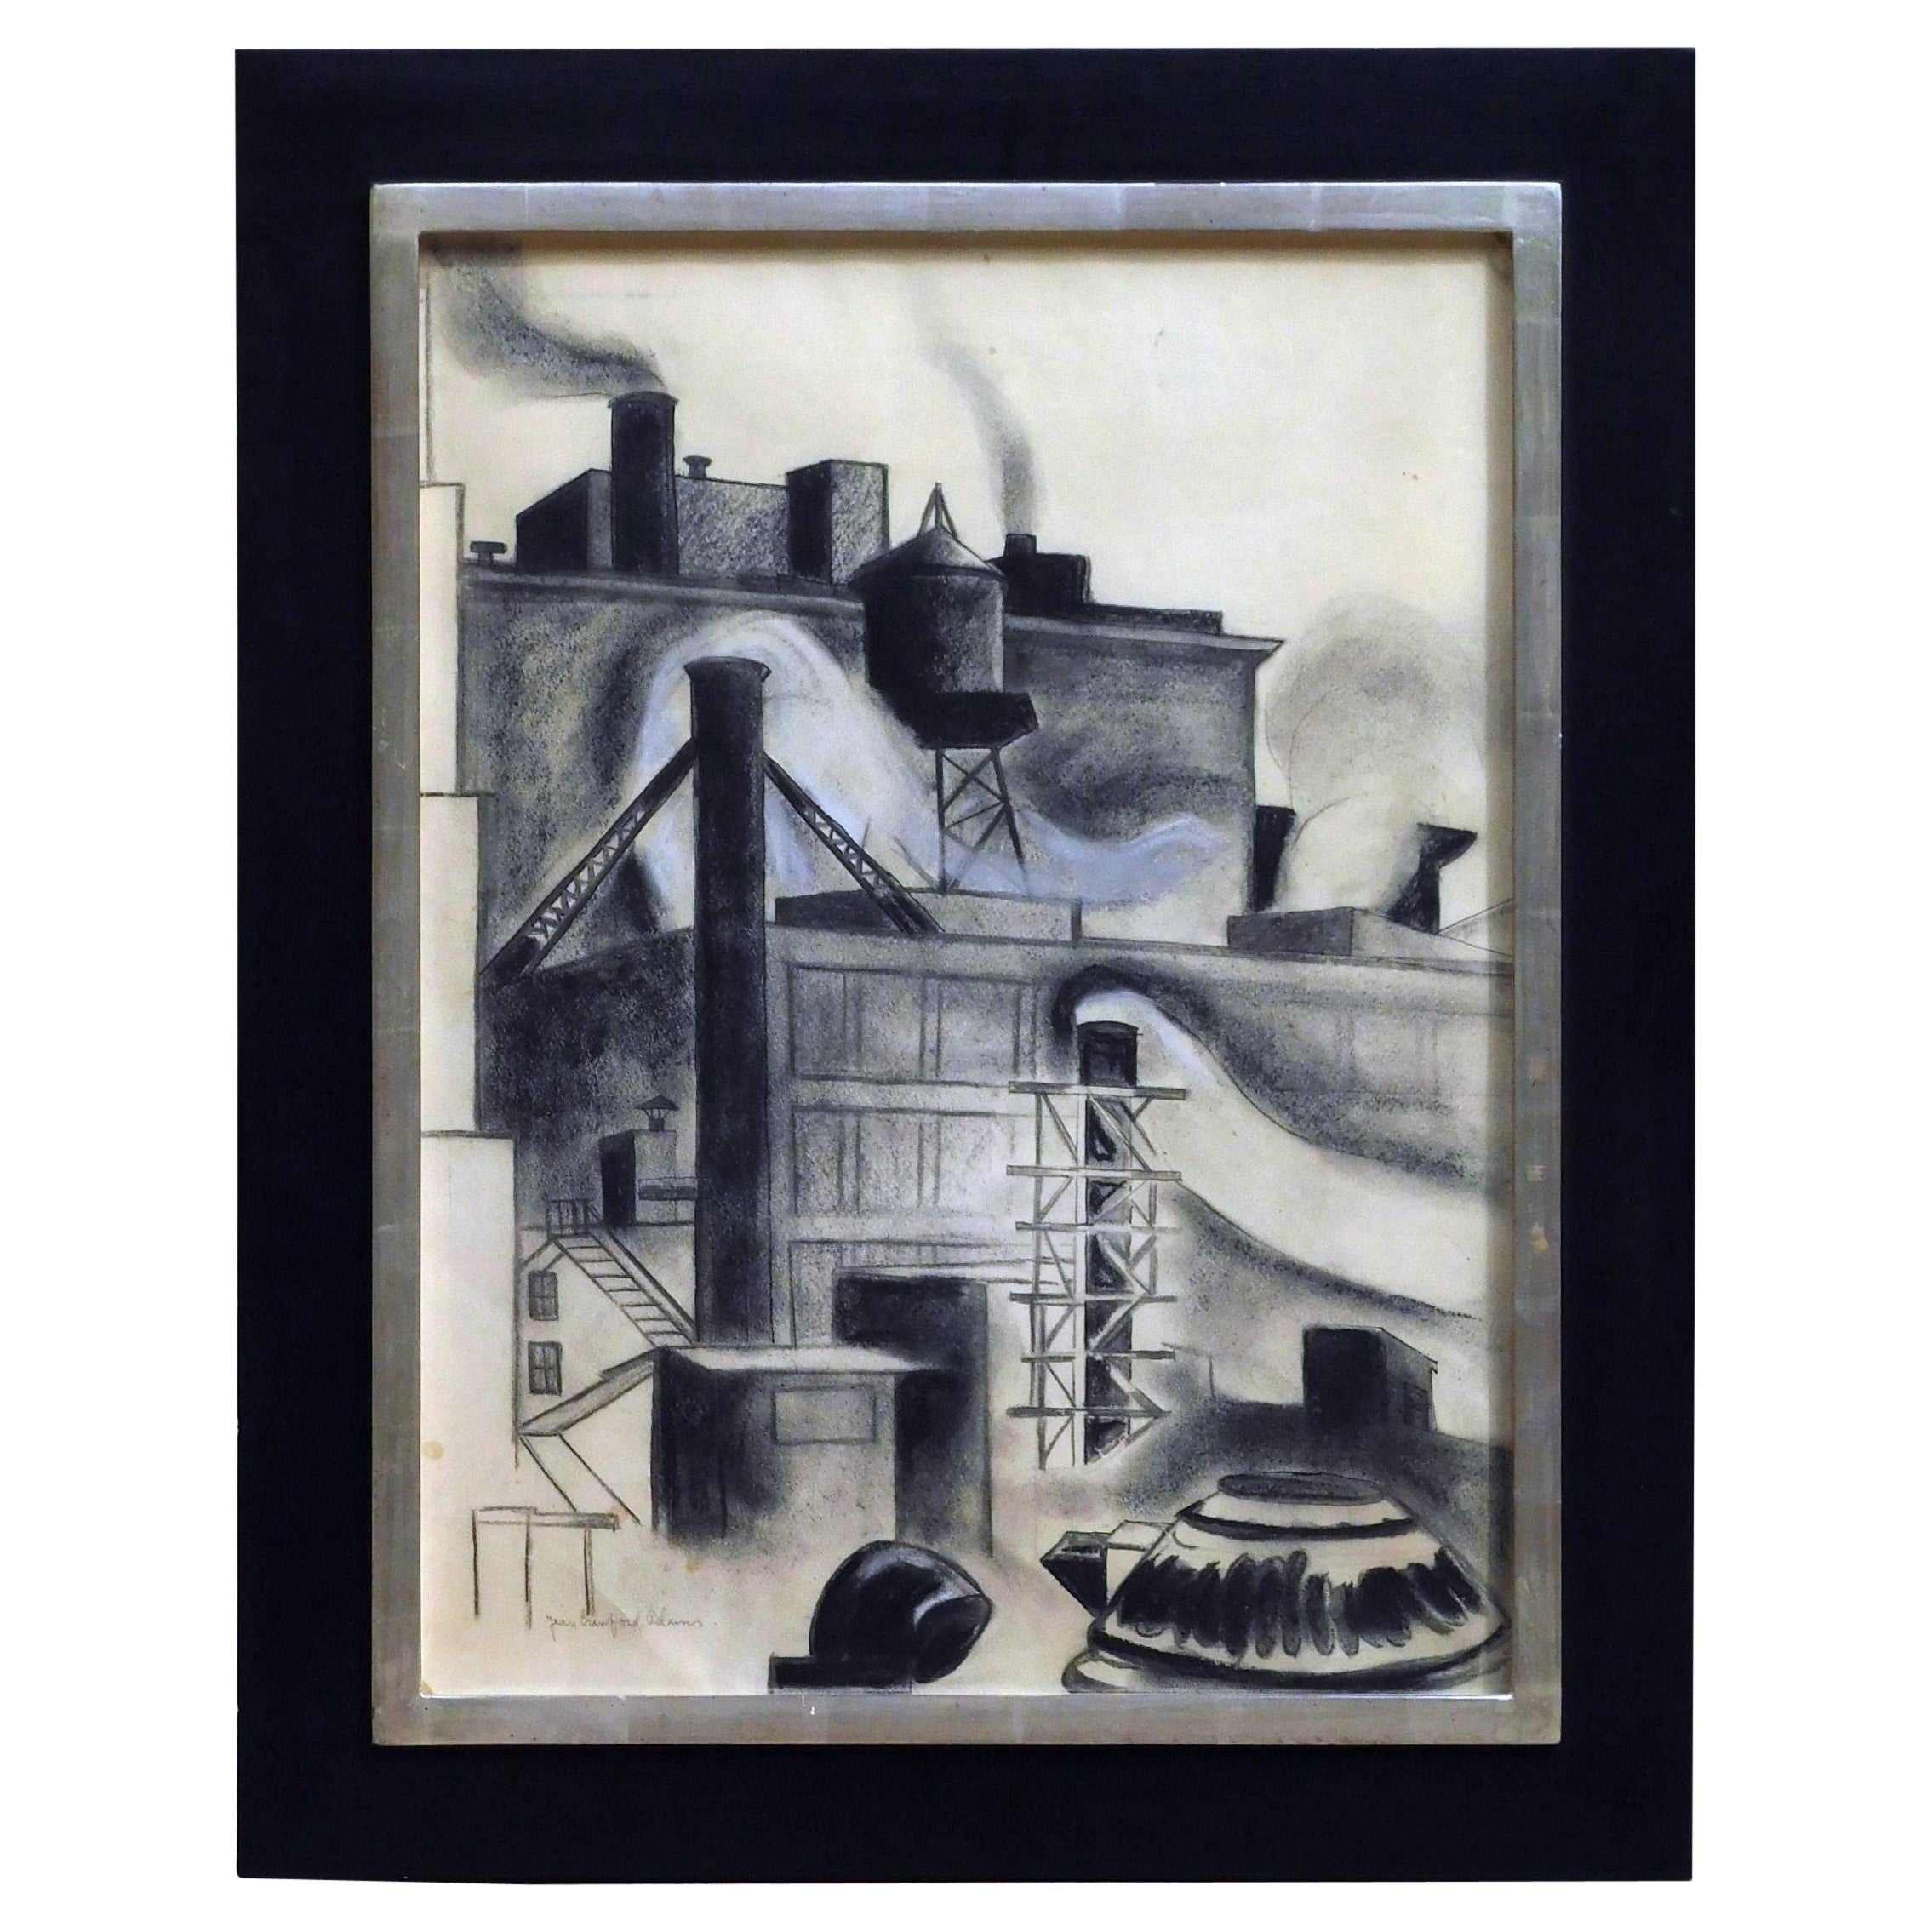 Jean Crawford Adams Original Drawing Chicago, circa 1930. “View from the Studio” For Sale